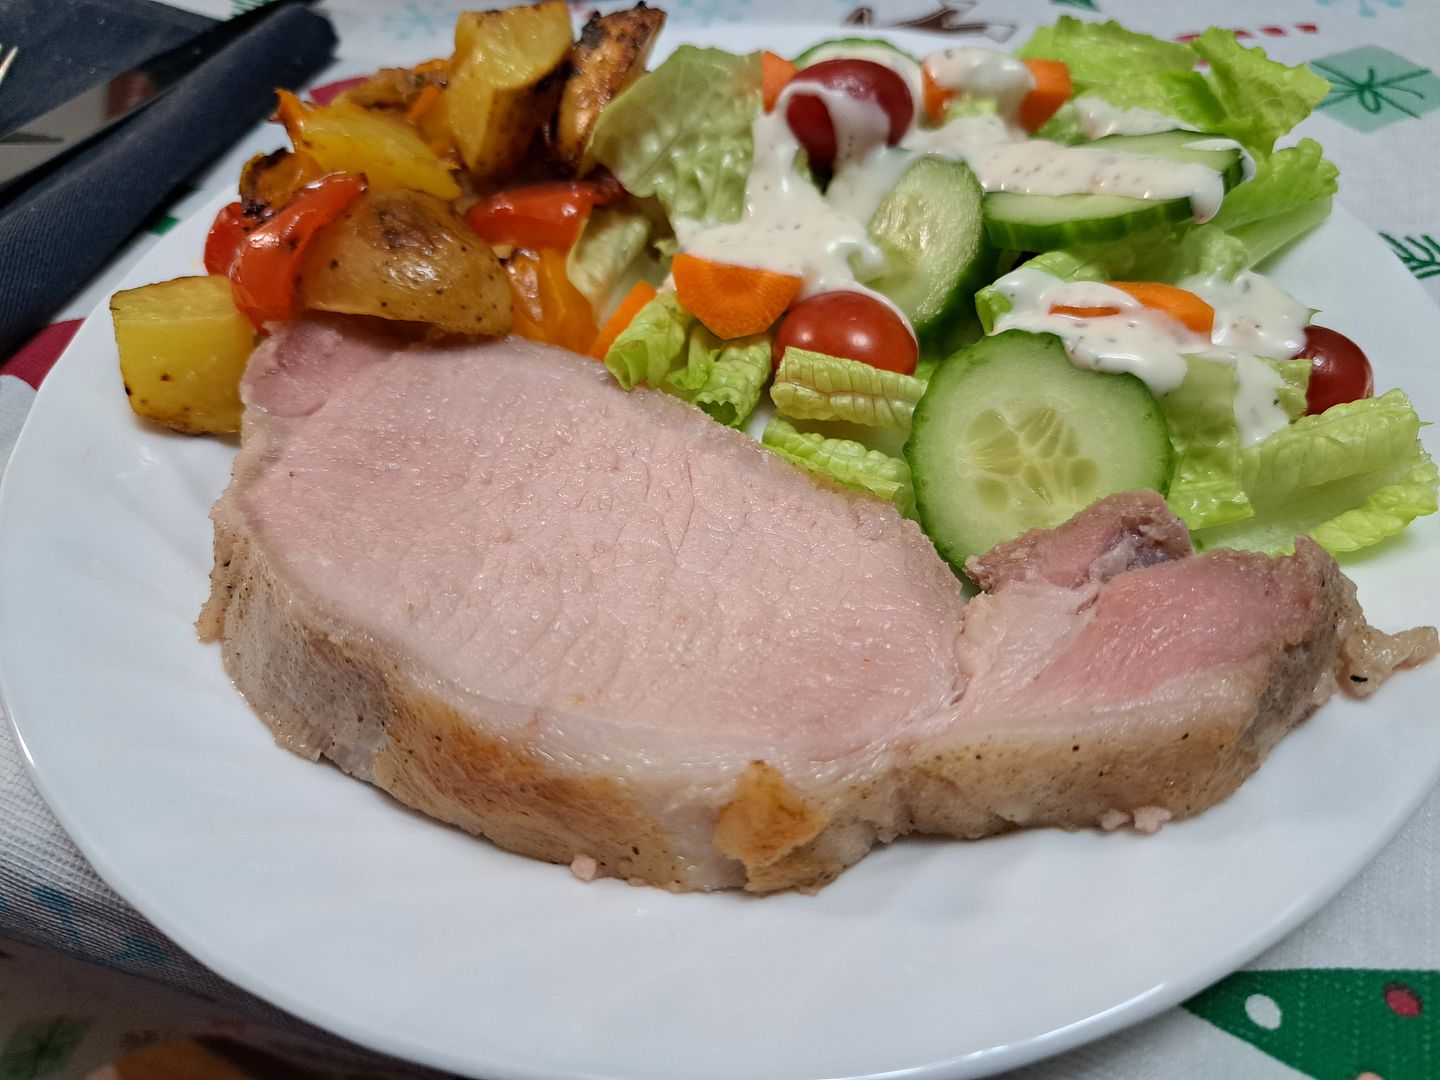 A slice of pork loin on a dinner plate, served with roasted potatoes and sweet peppers and a tossed green salad.